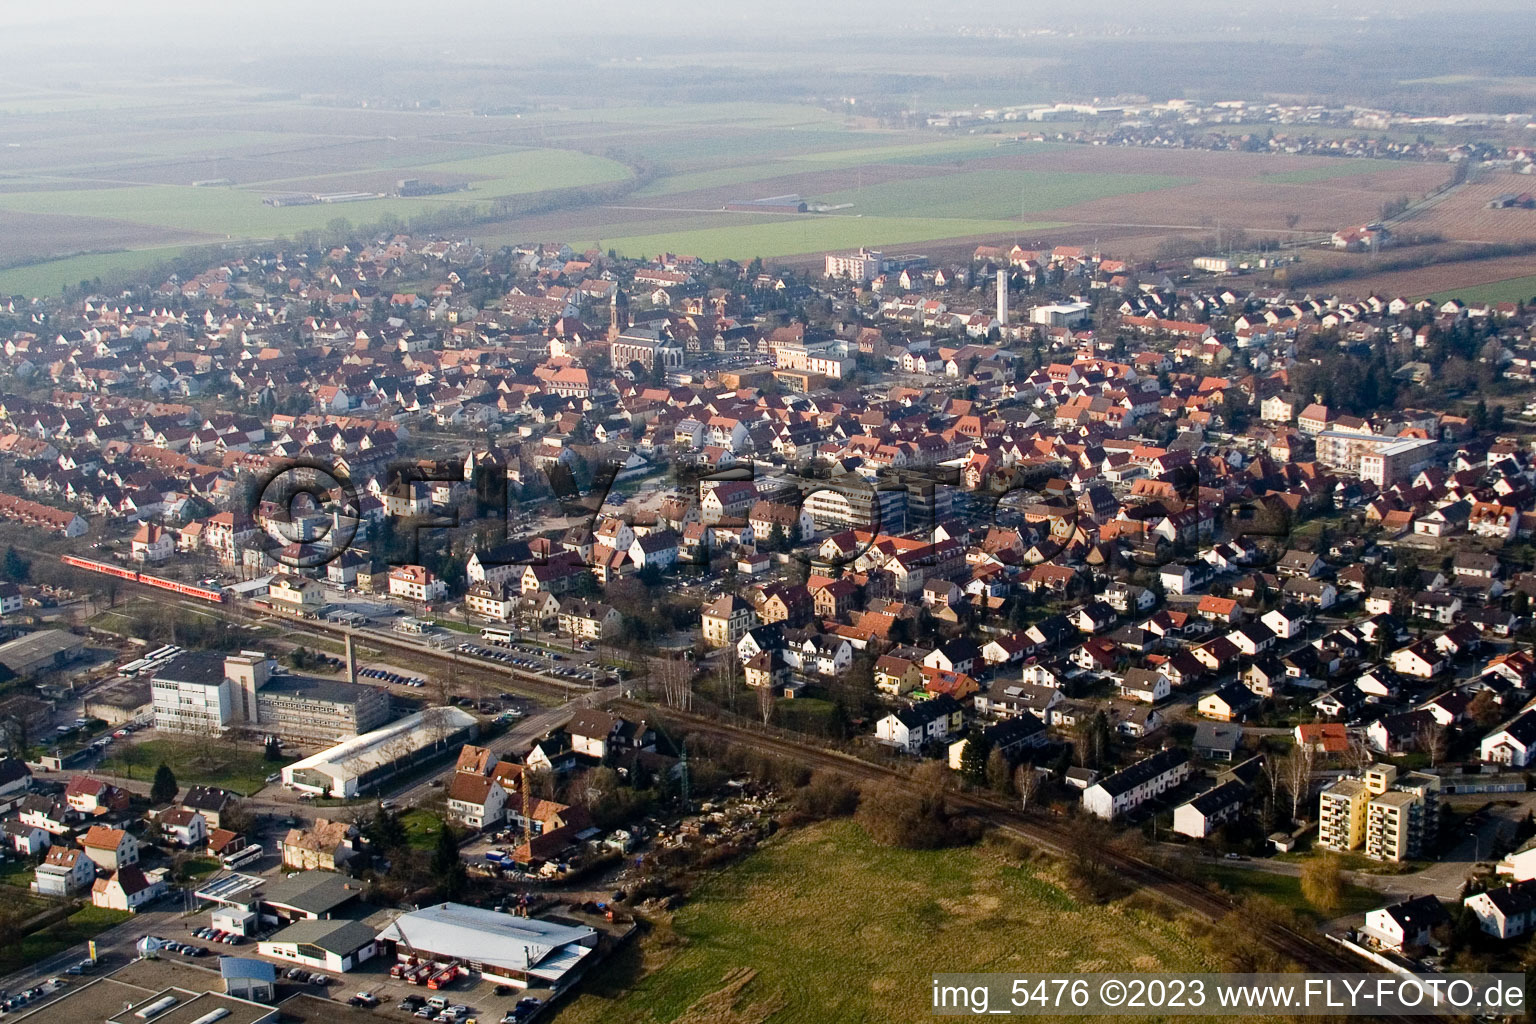 Bird's eye view of From the southeast in Kandel in the state Rhineland-Palatinate, Germany